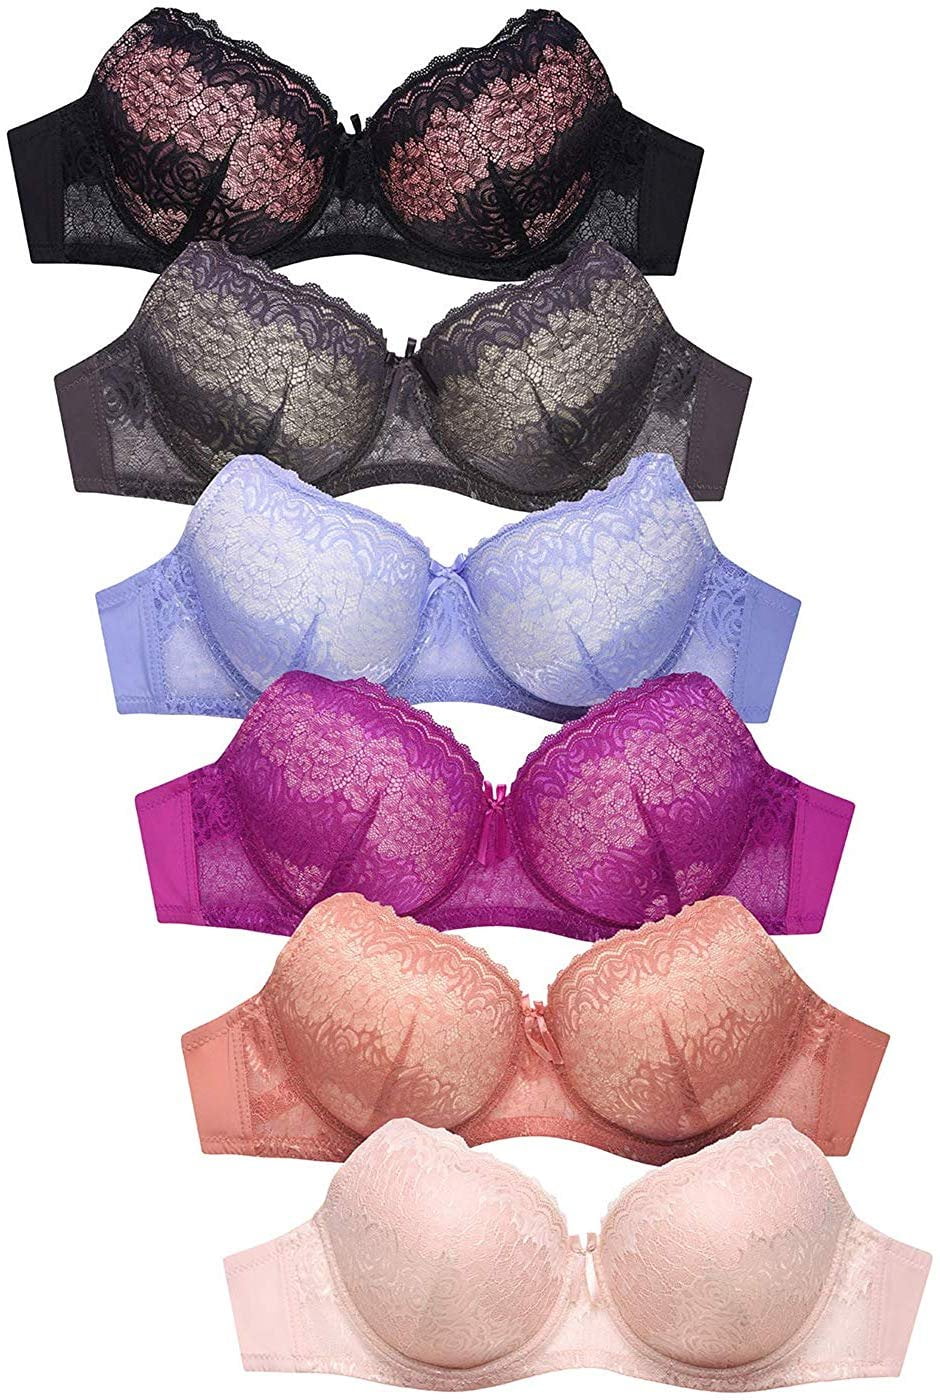 Womens 6 Pack of Everyday Plain, Lace, D, DD, DDD Bahrain